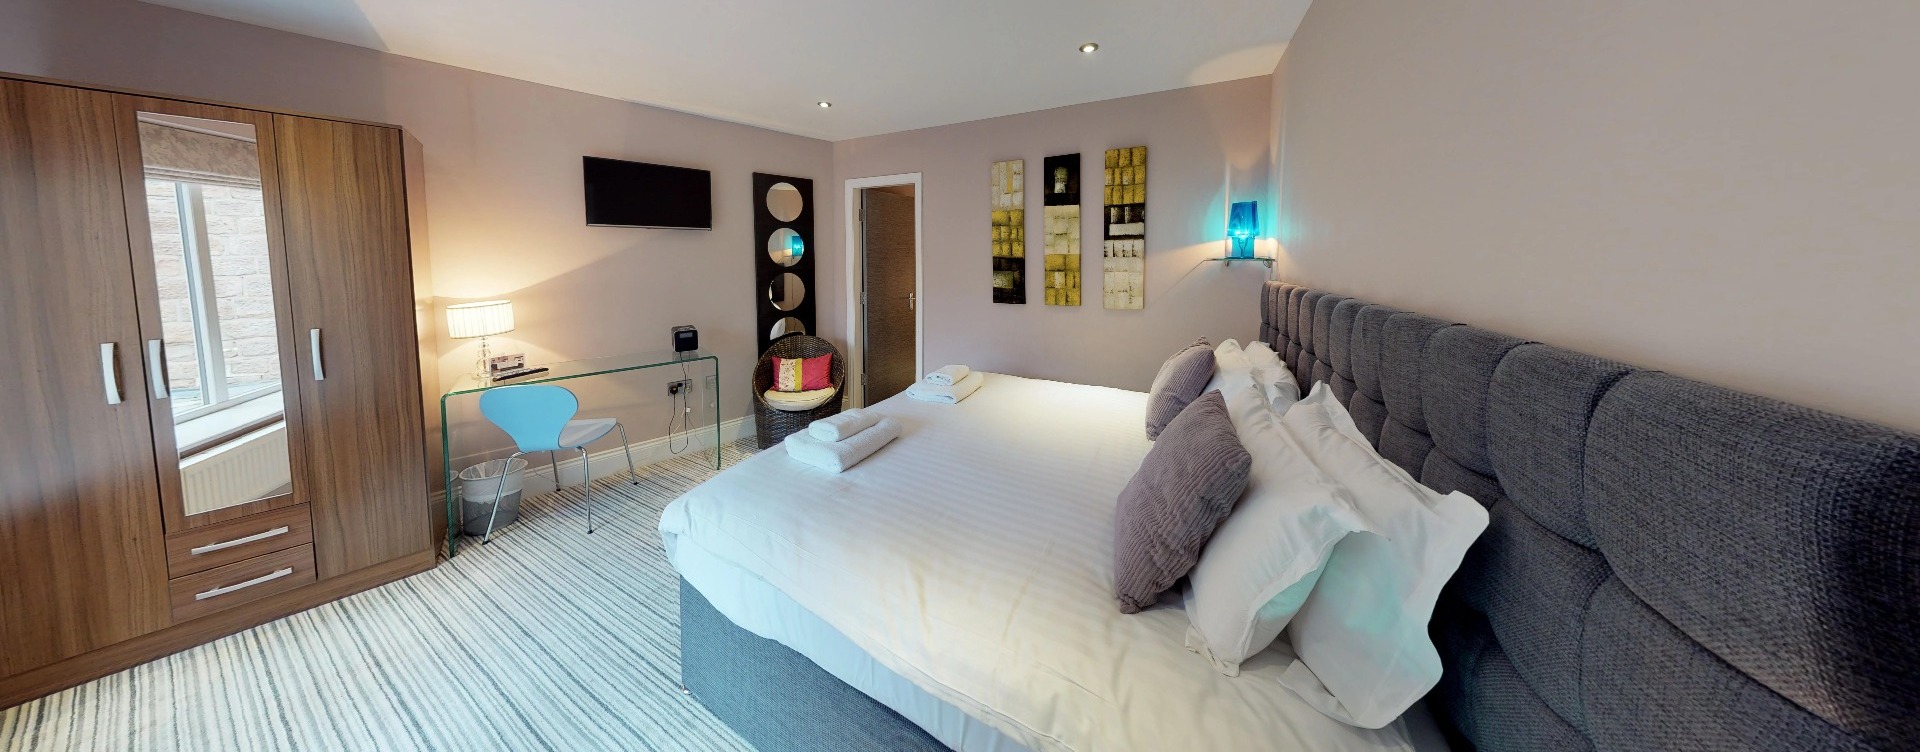 Cheap hotels in Harrogate or serviced apartments TO RENT